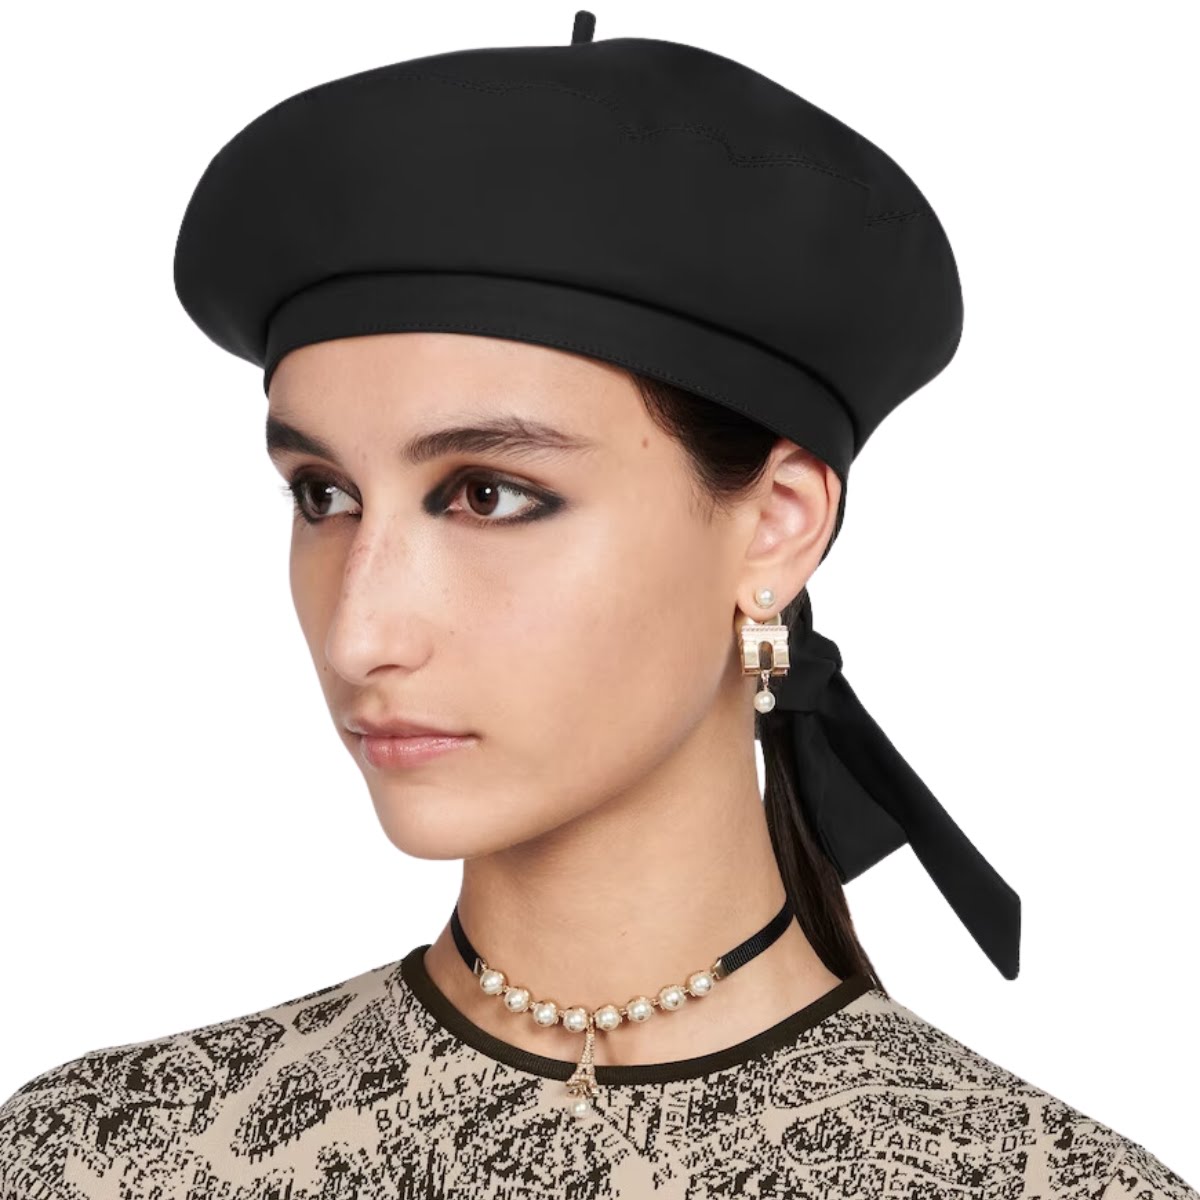 Arty Dior Oblique Beret with Bow, €790